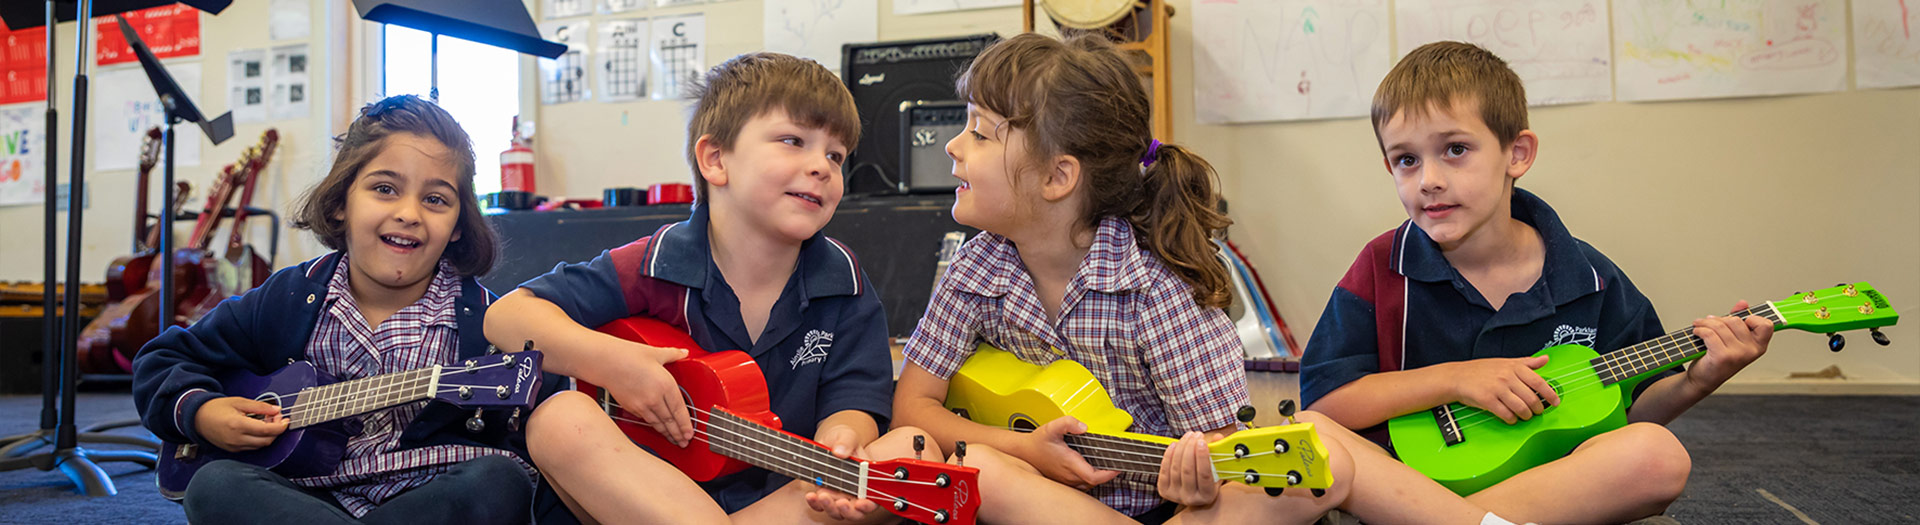 primary school students in music class playing ukuleles